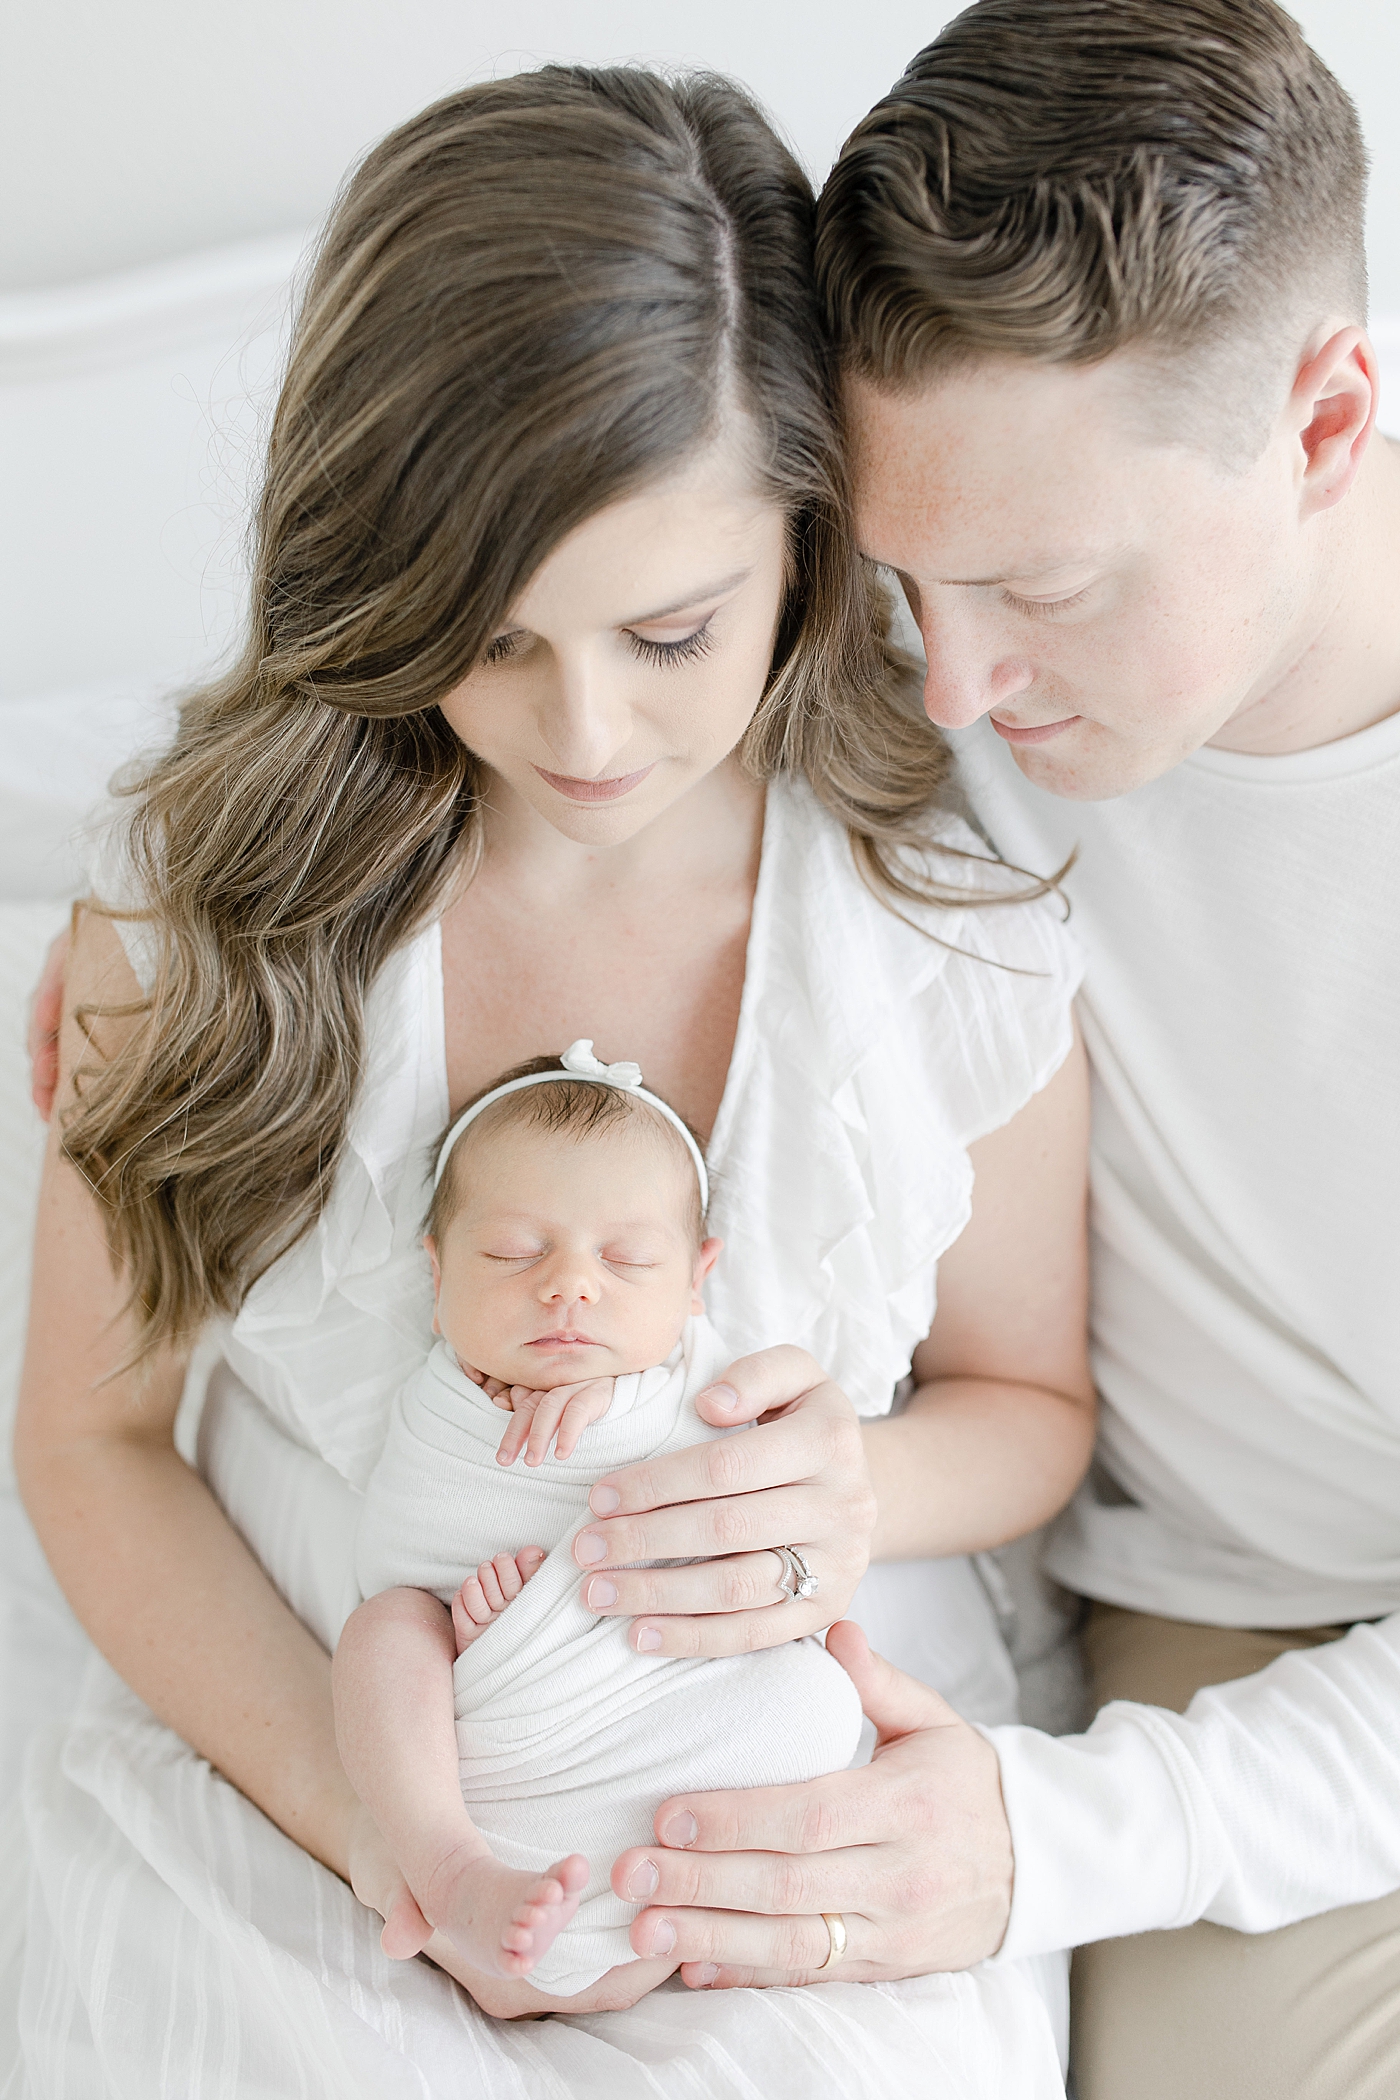 Newborn with parents for studio session | Photo by Little Sunshine Photography.